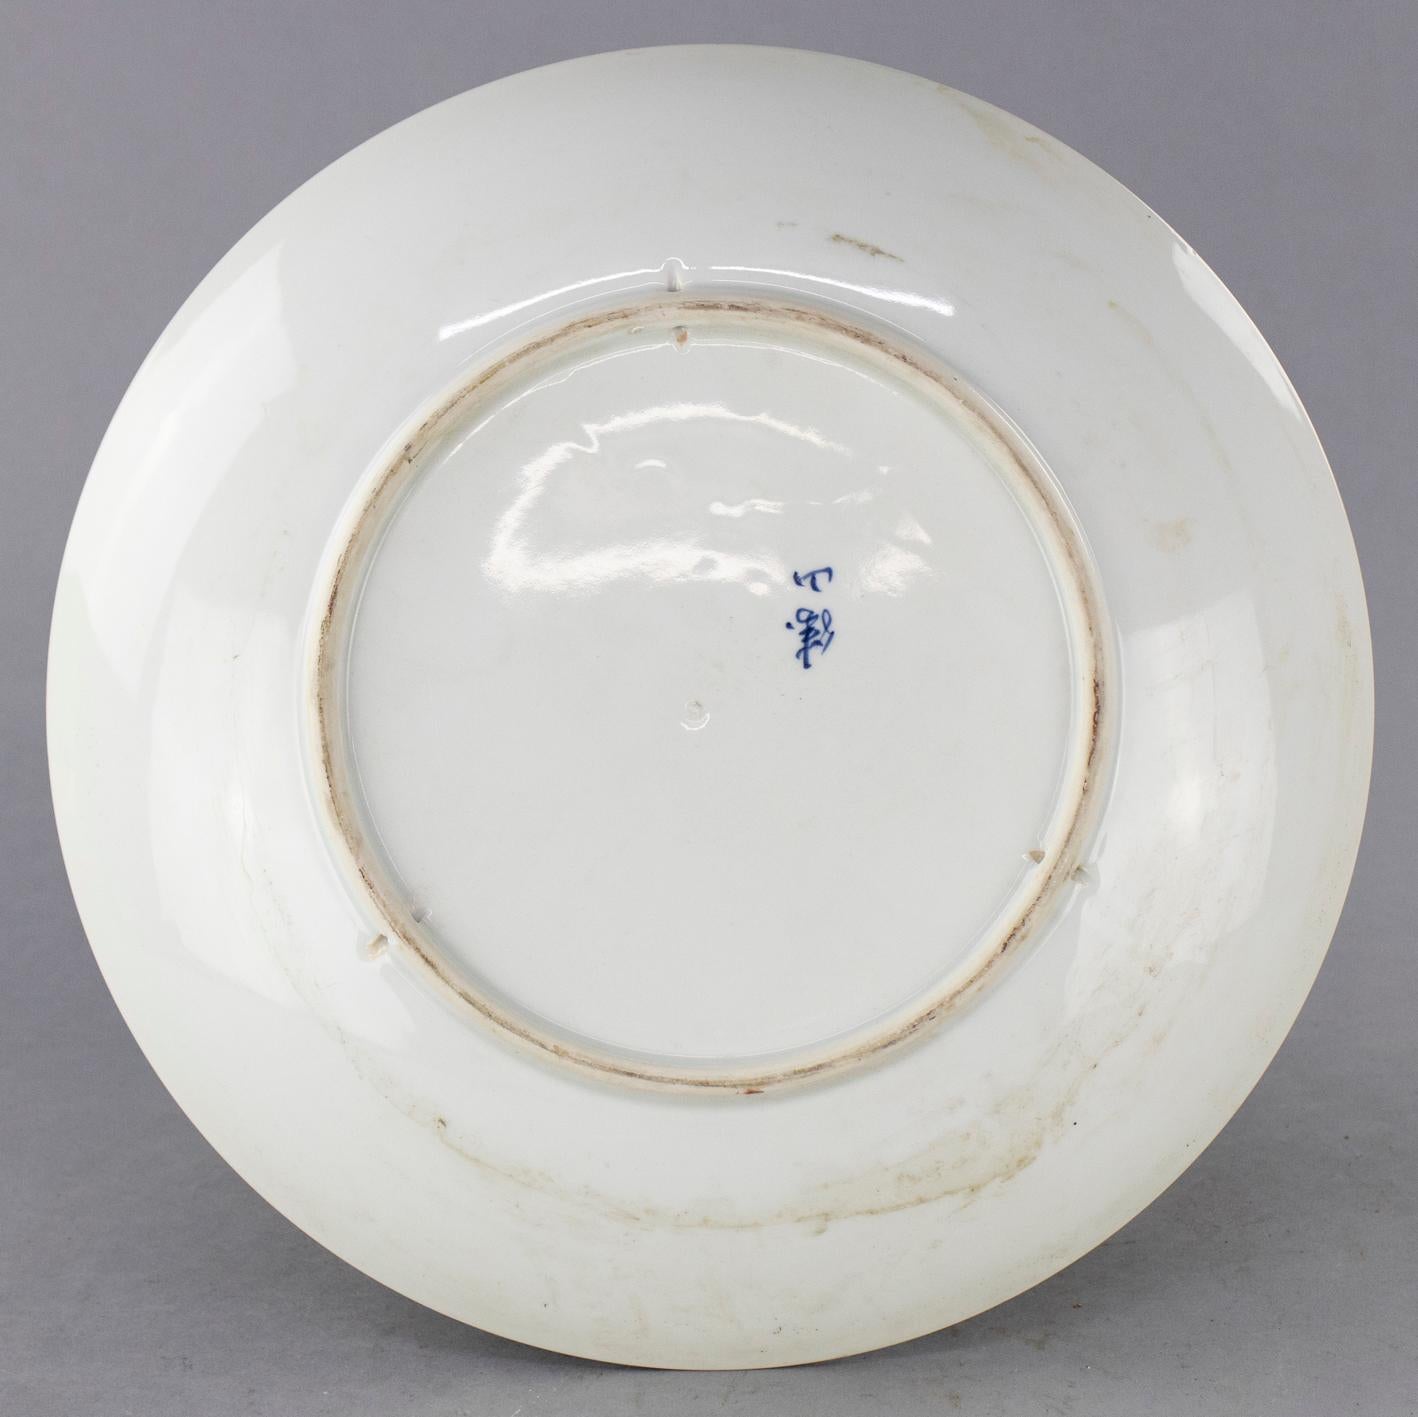 An antique Japanese Meiji Imari charger offers porcelain construction with hand painted and gilt stylized fan decoration, en verso signed as photographed, 20th century. 

Measures: 2